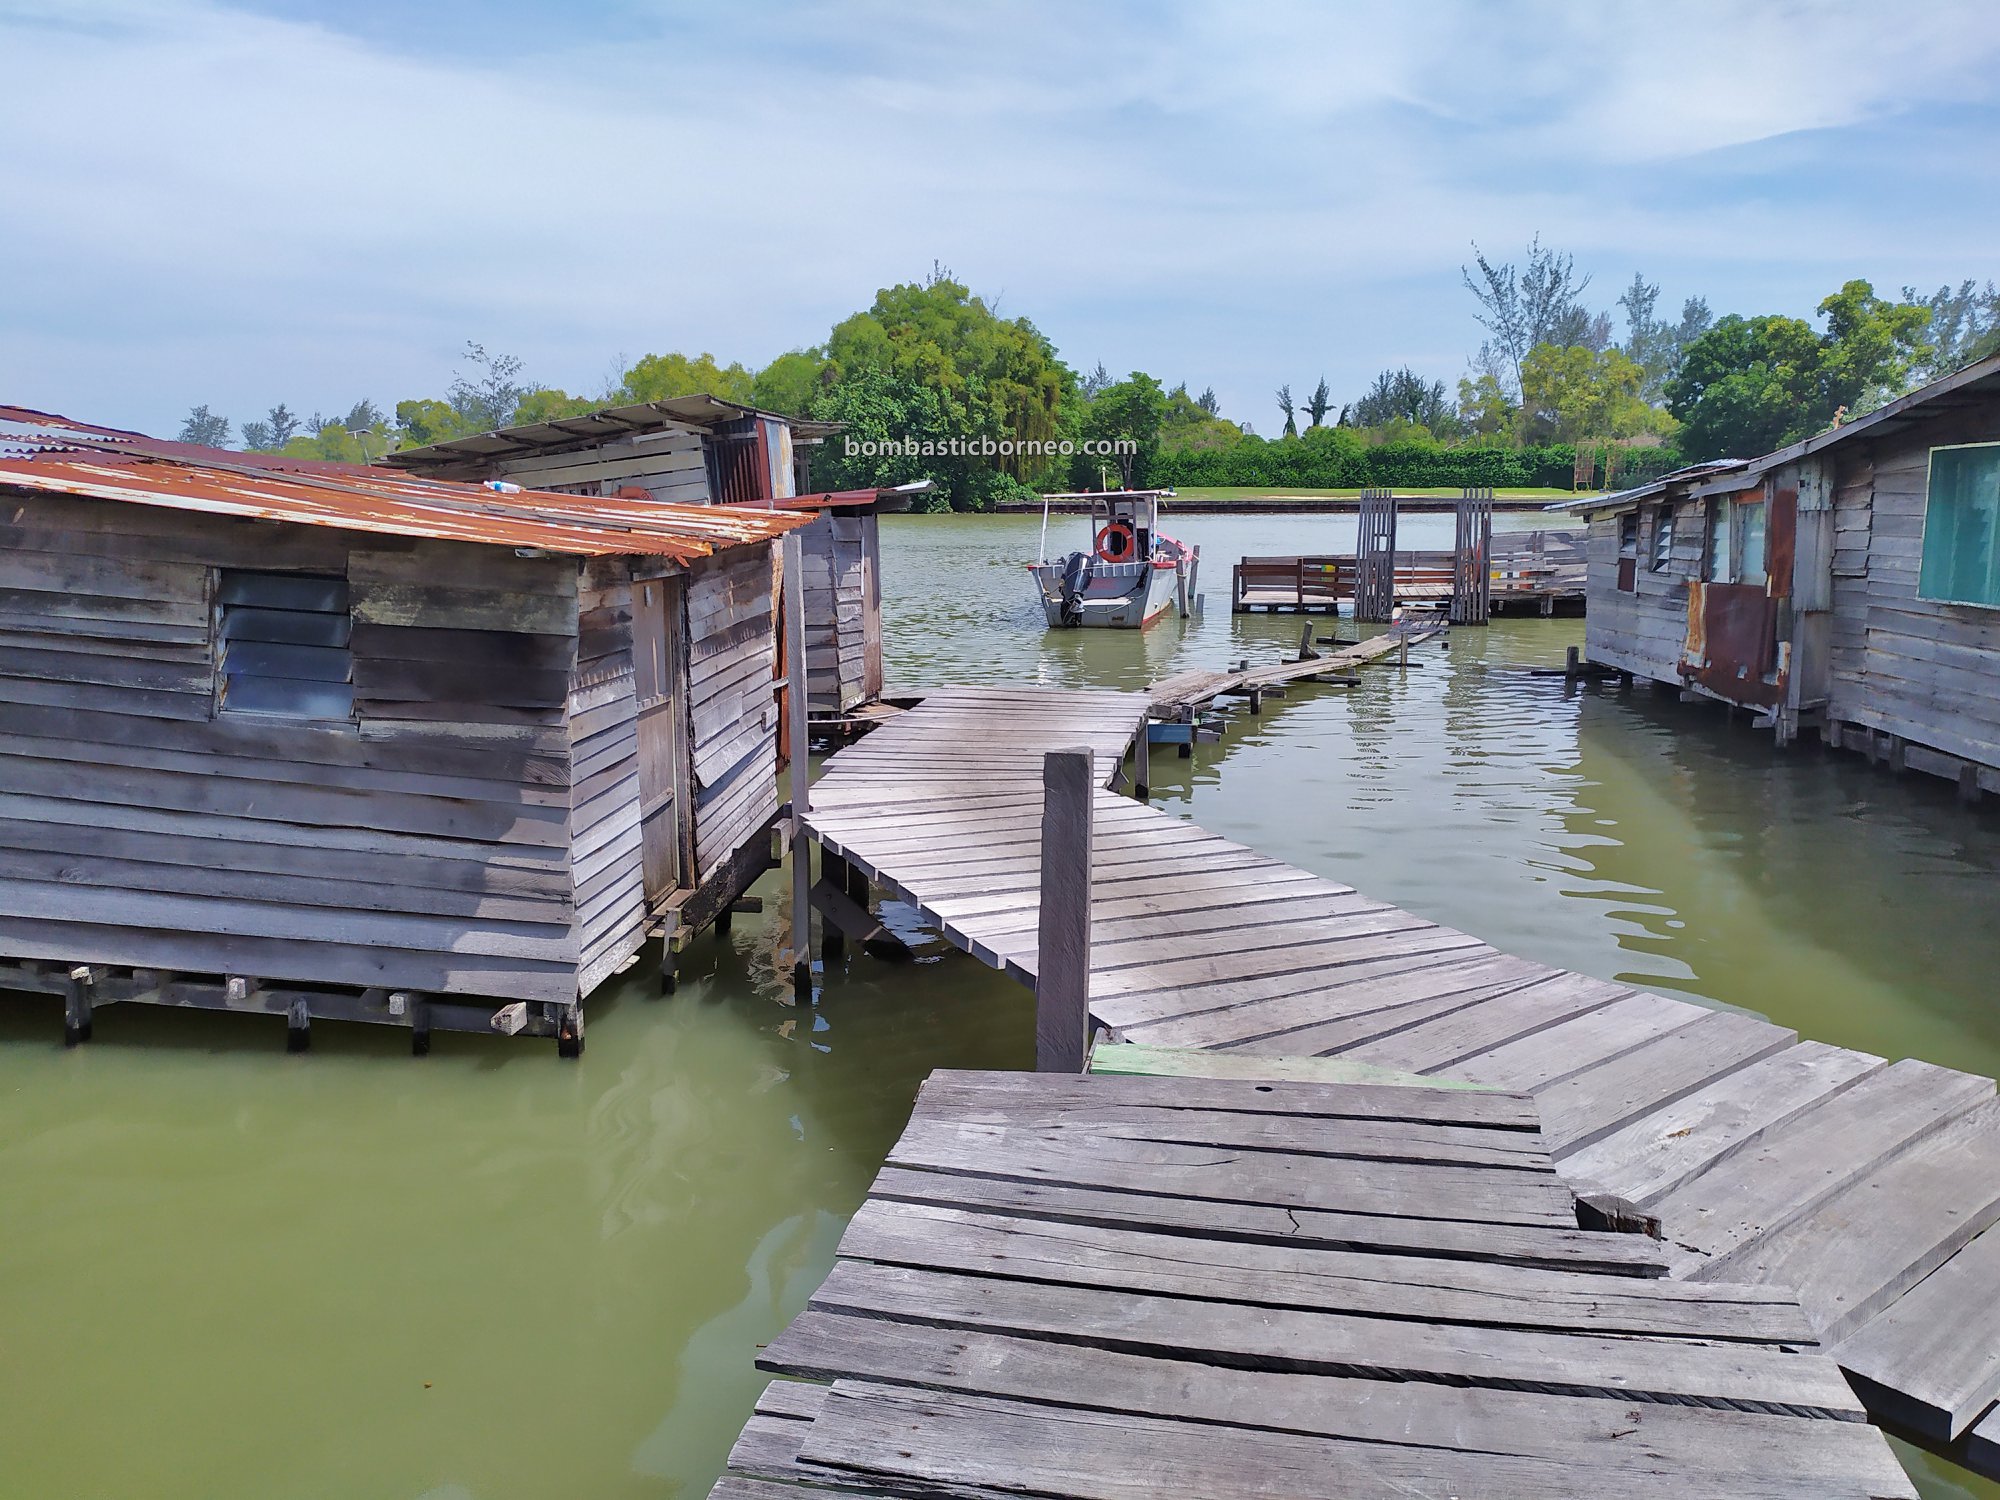 Sarawak, backpackers, destination, Discover Miri City, exploration, floating house, rumah terapung. Miri waterfront, Malaysia, Seahorse, Tourism, tourist attraction, travel guide, Borneo